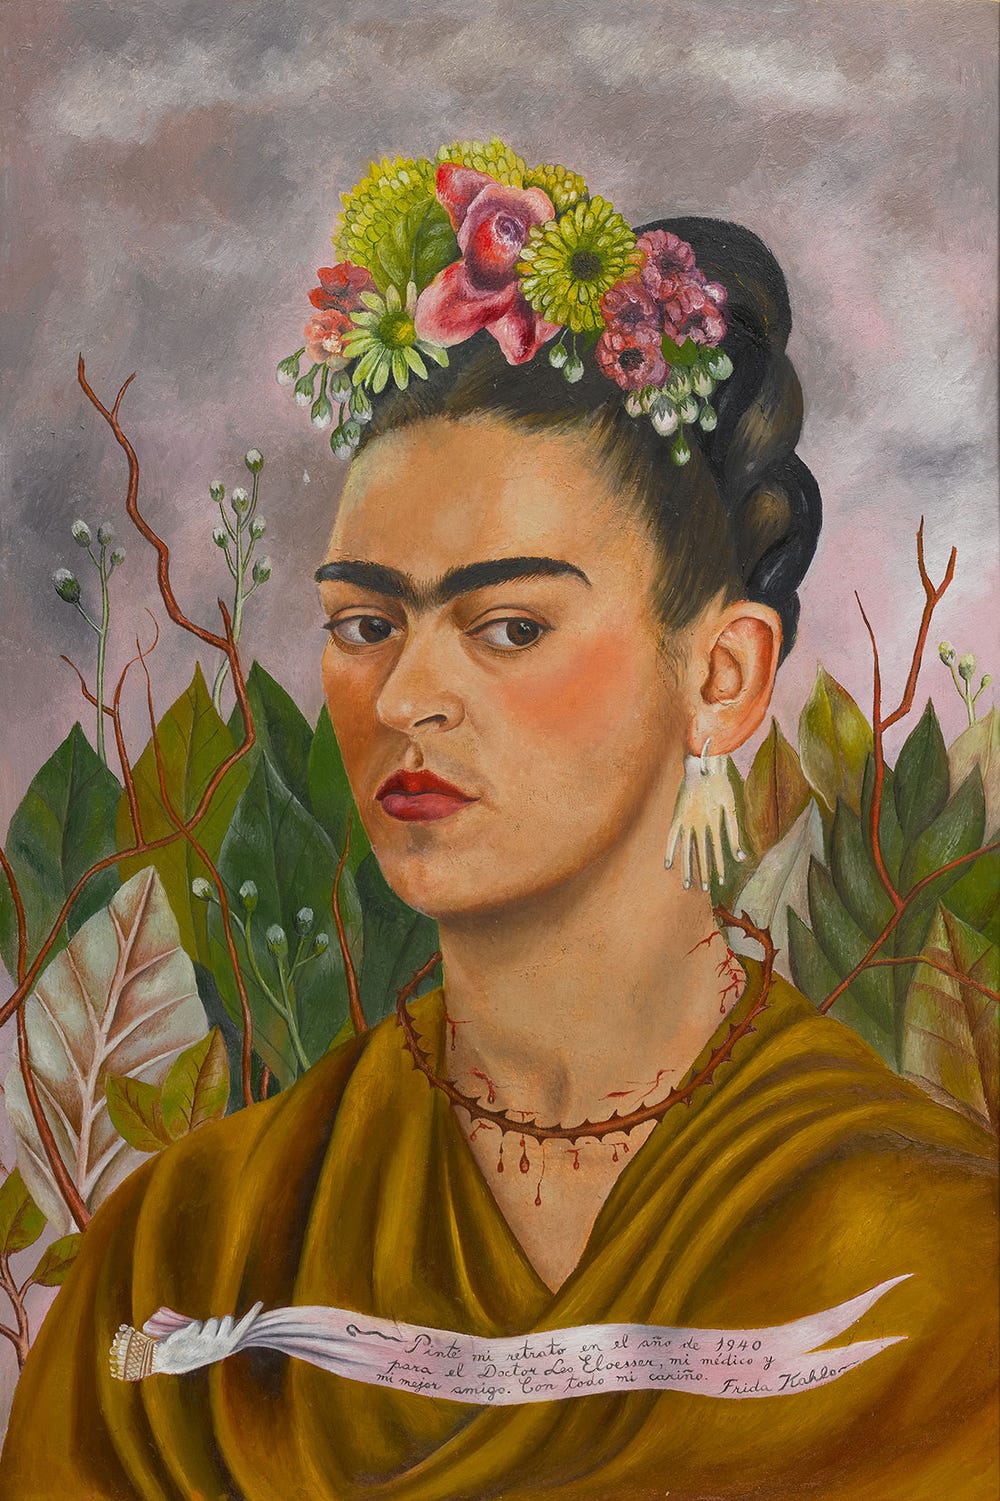 painting of Frida Kahlo with pink and green flowers in her hair and a necklace of thorns around her neck